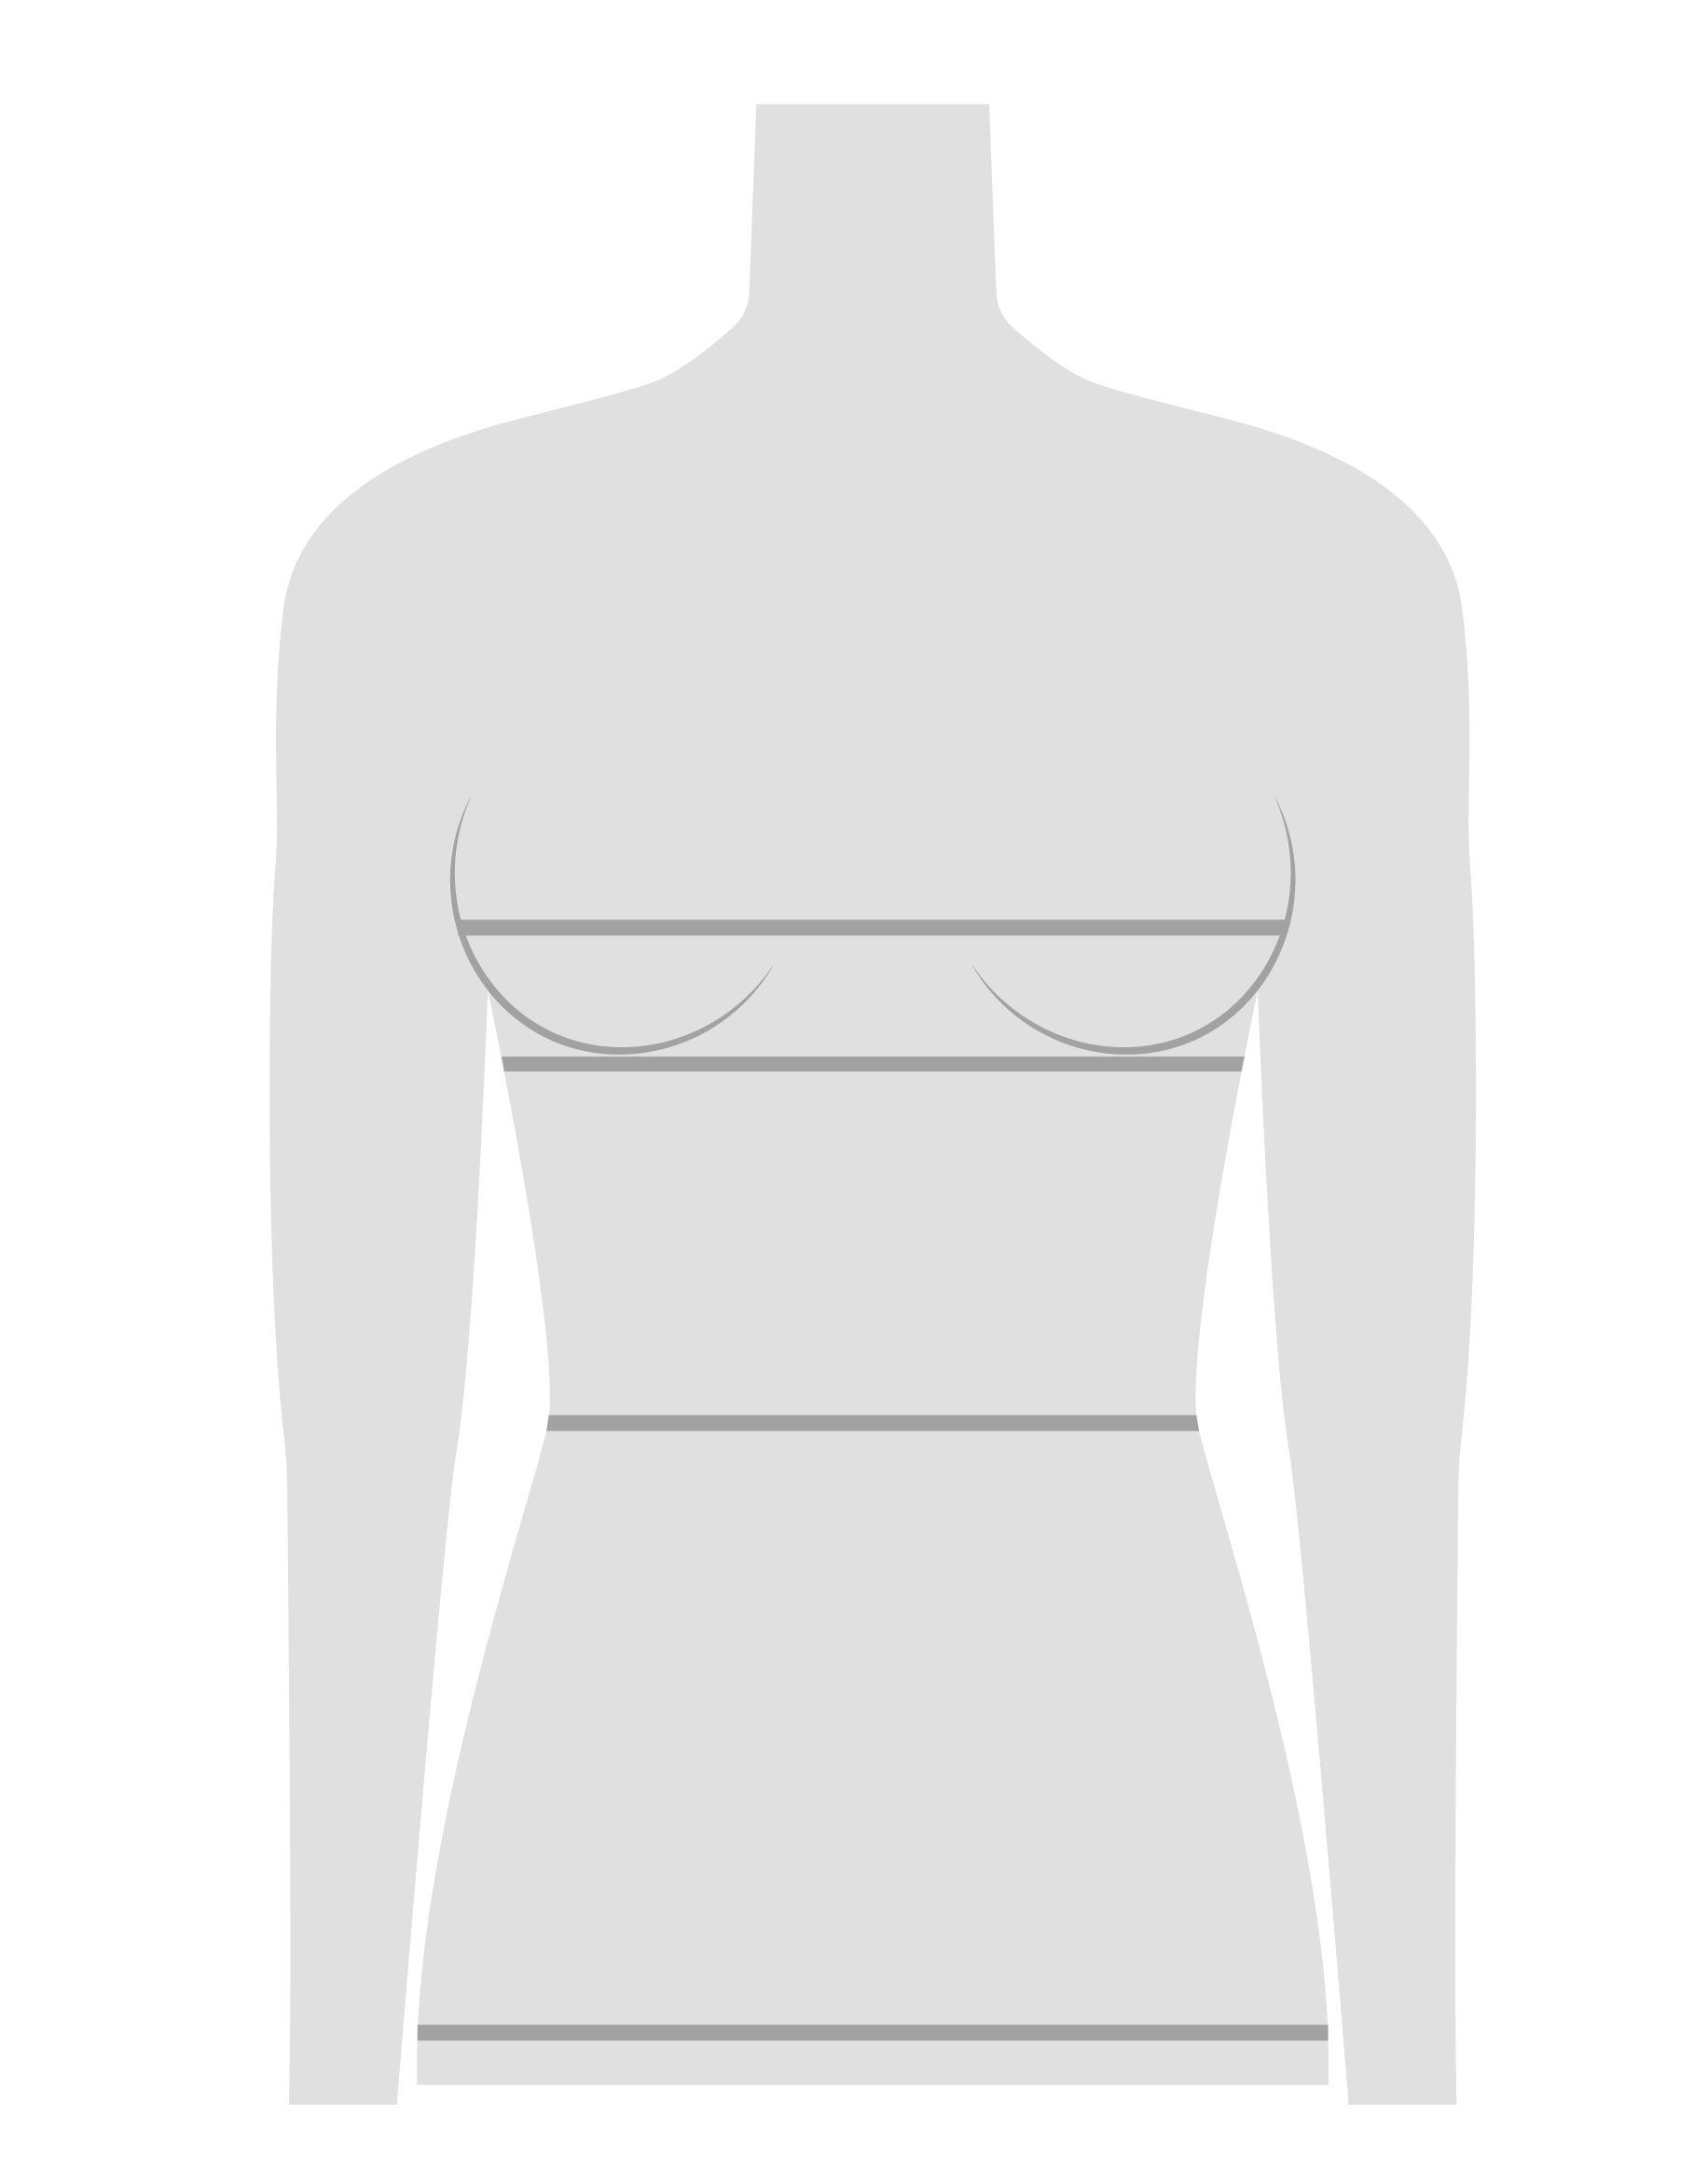 A silhouette of a mannequin with lines on the bust, waist, and hips indicating where to measure.